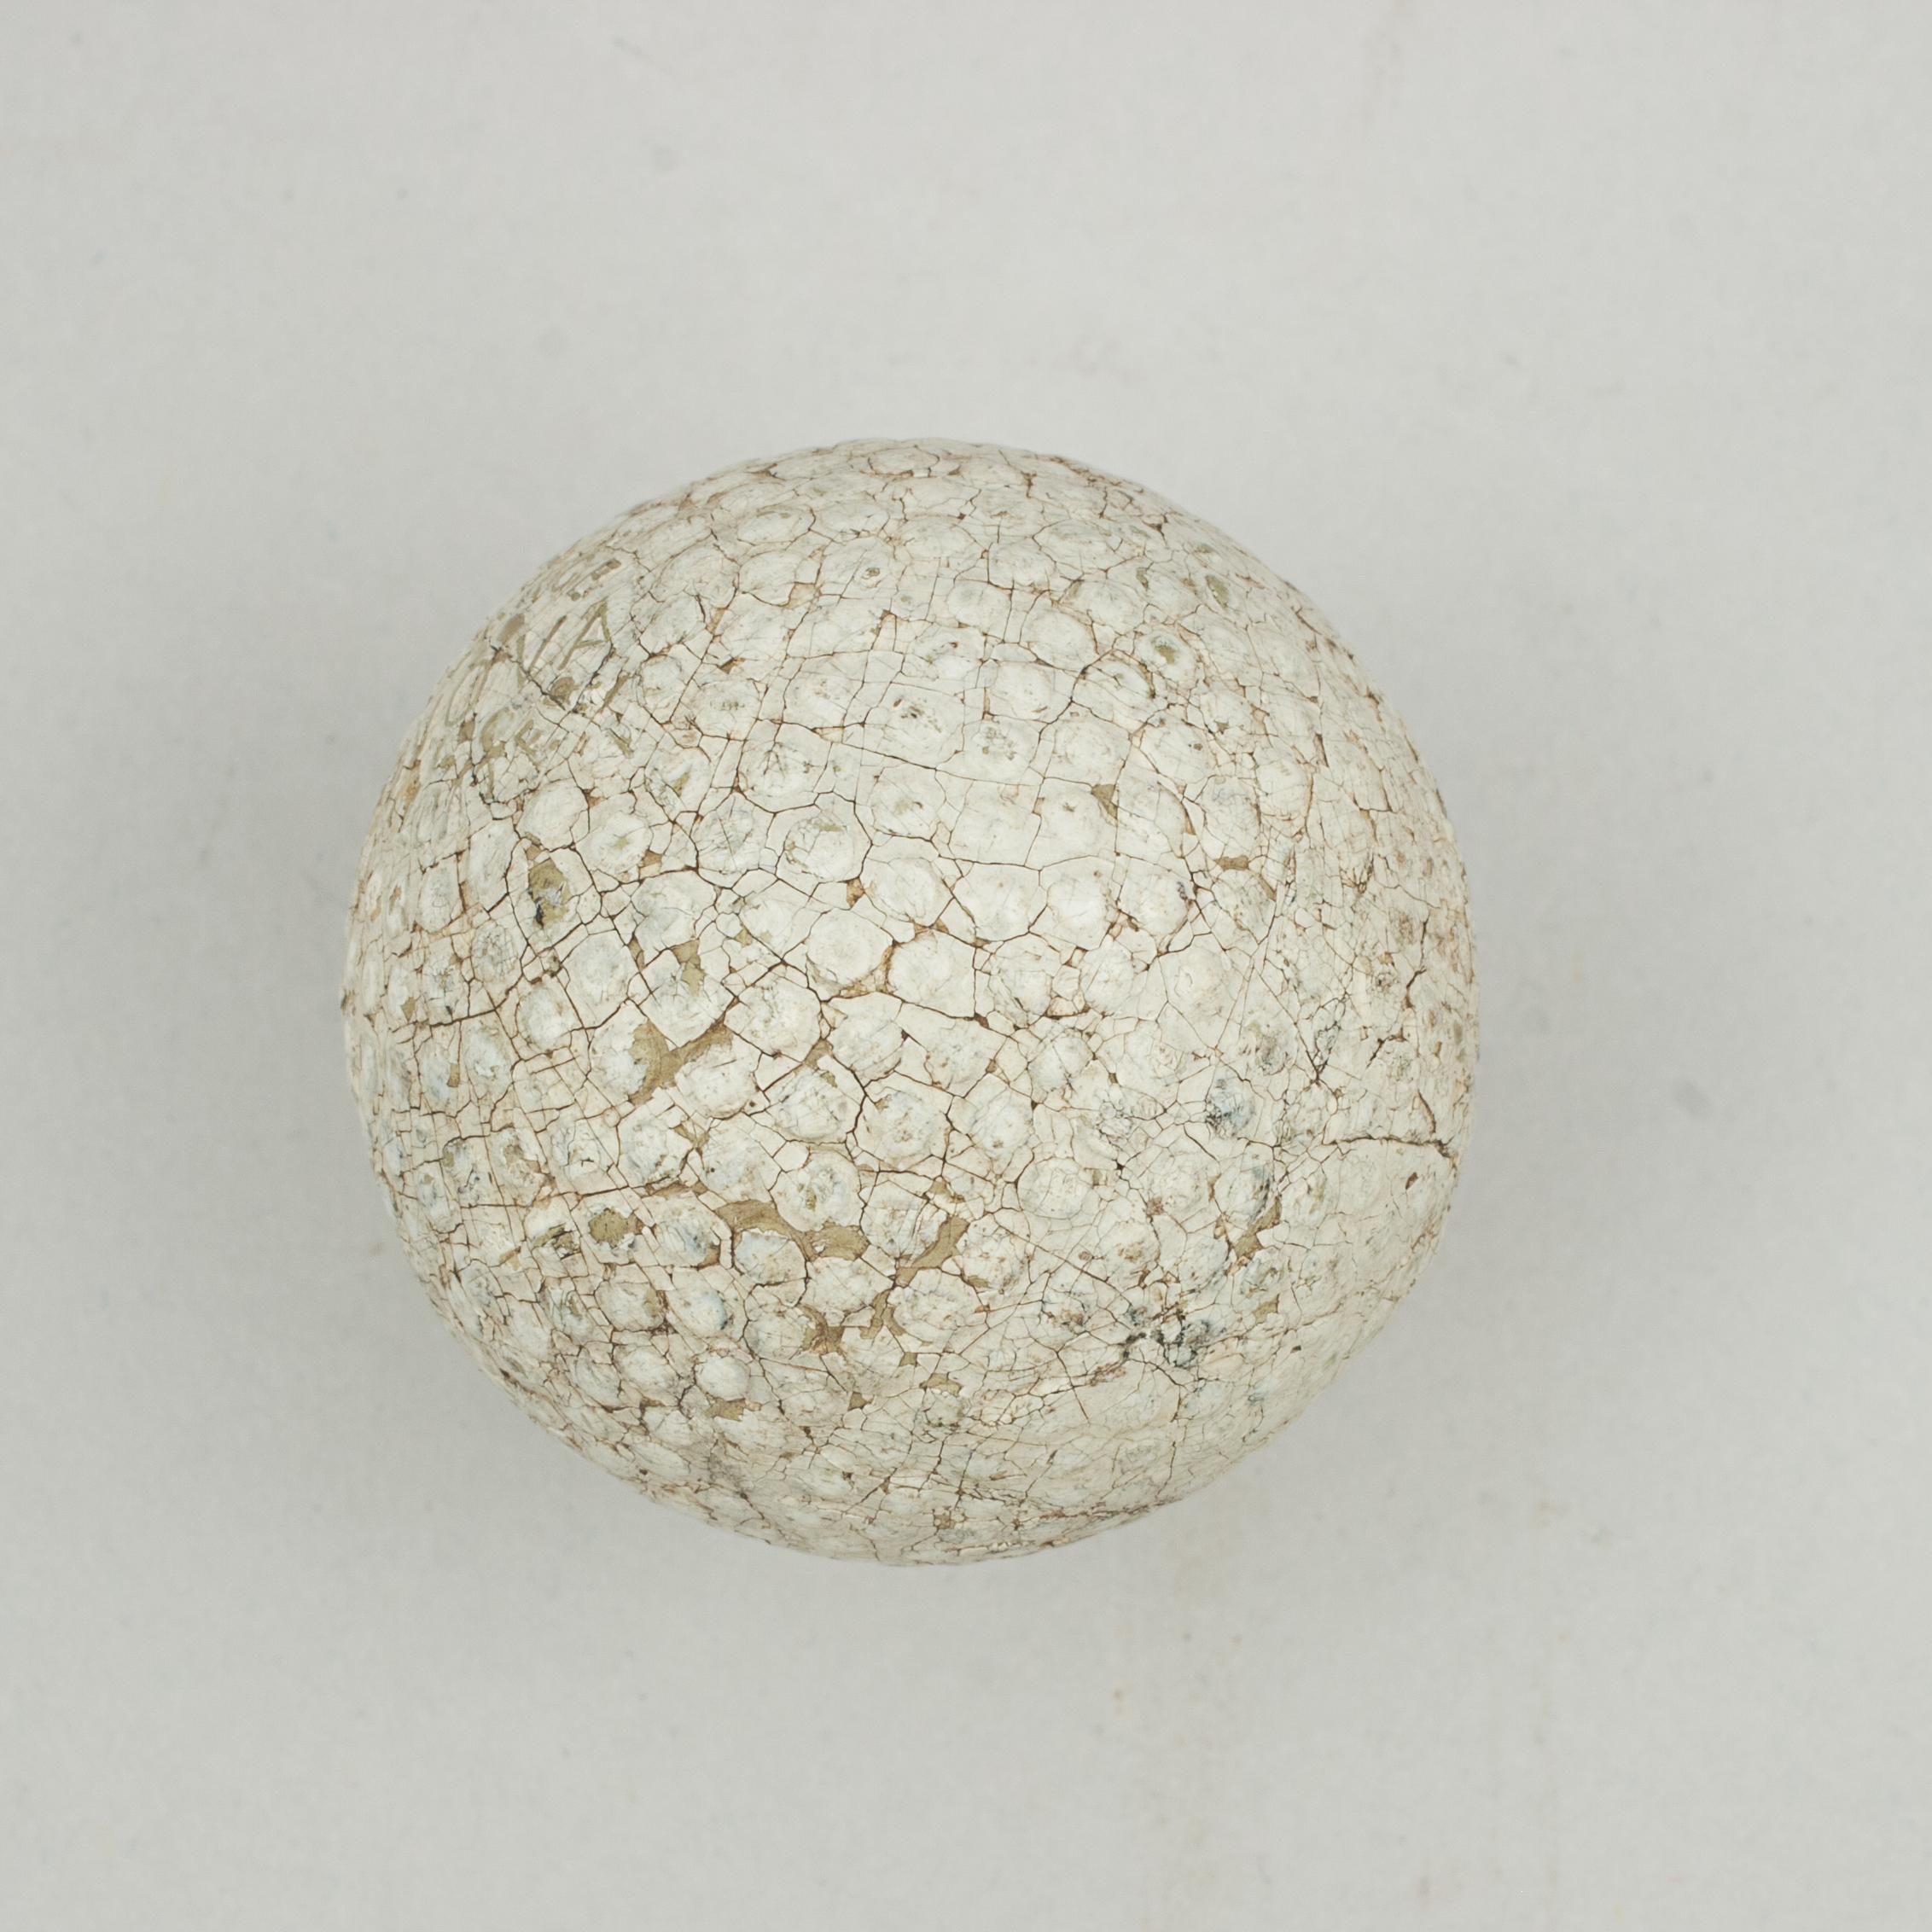 Bramble Golf Ball, Large NOVA Floater.
A good example of 'Large NOVA Floater' bramble patterned rubber core golf ball. The golf ball is in good condition and is manufactured by Boyle's. The ball is marked 'Large NOVA Floater' on both poles, it is